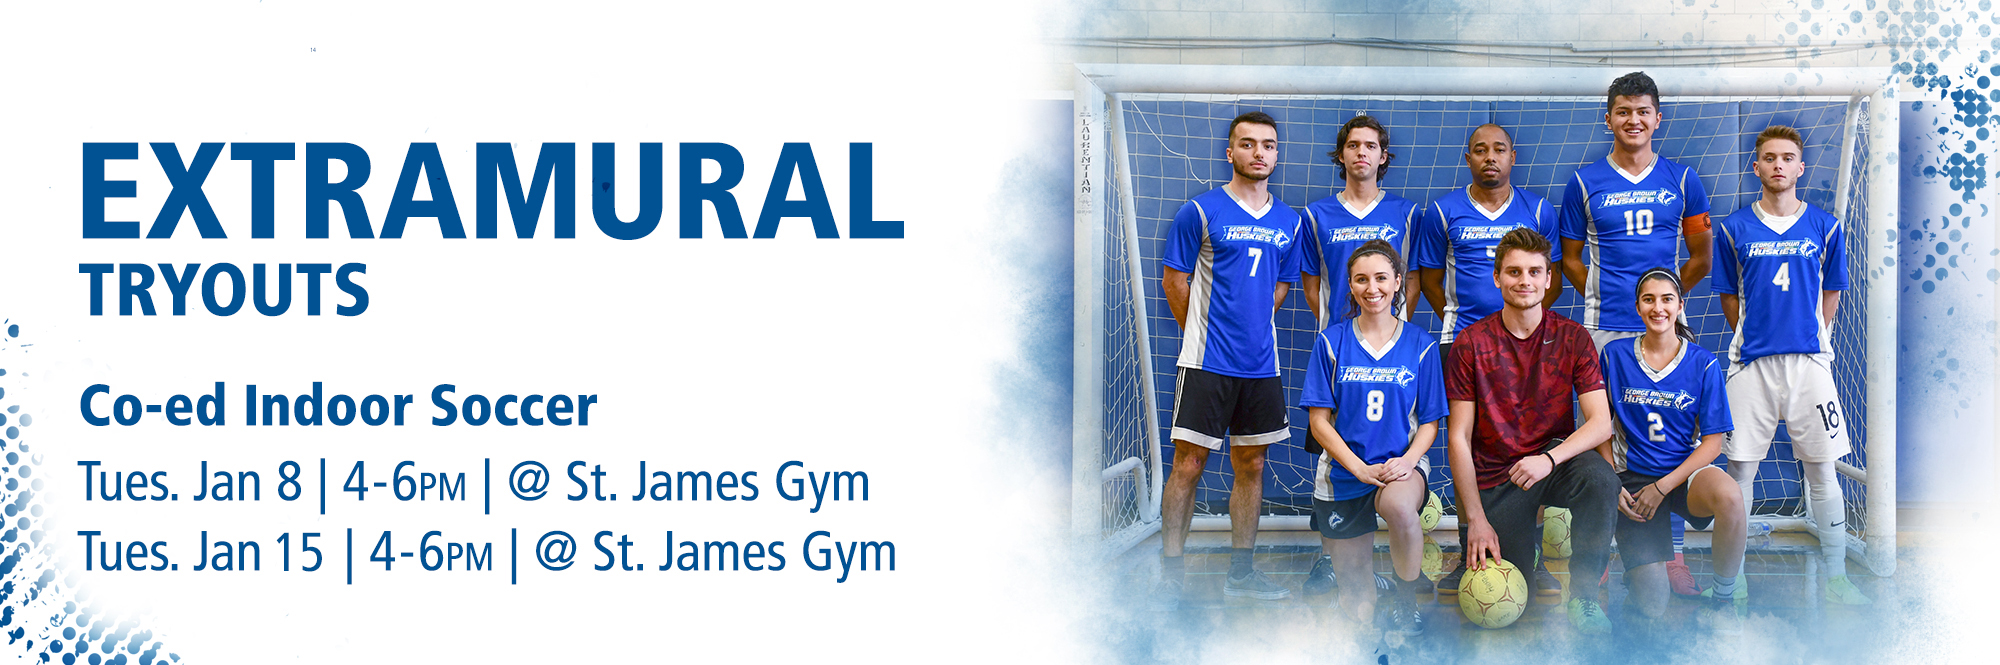 TRYOUT DATES SET FOR GEORGE BROWN CO-ED EXTRAMURAL INDOOR SOCCER TEAM